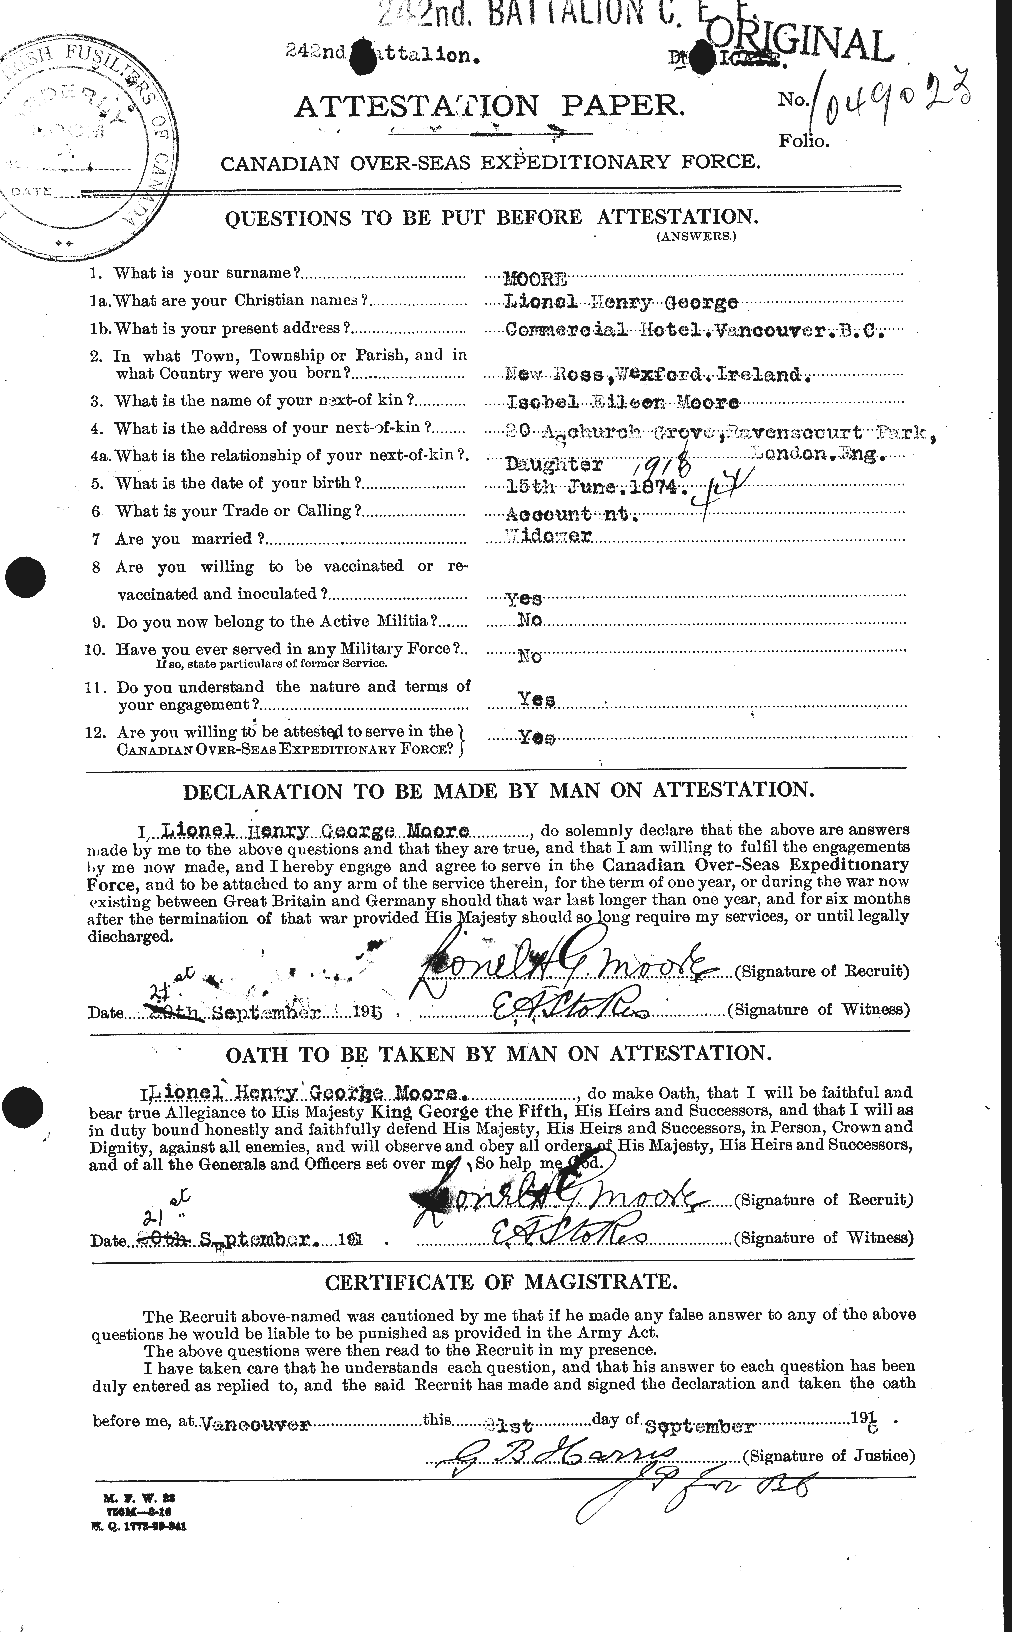 Personnel Records of the First World War - CEF 503416a